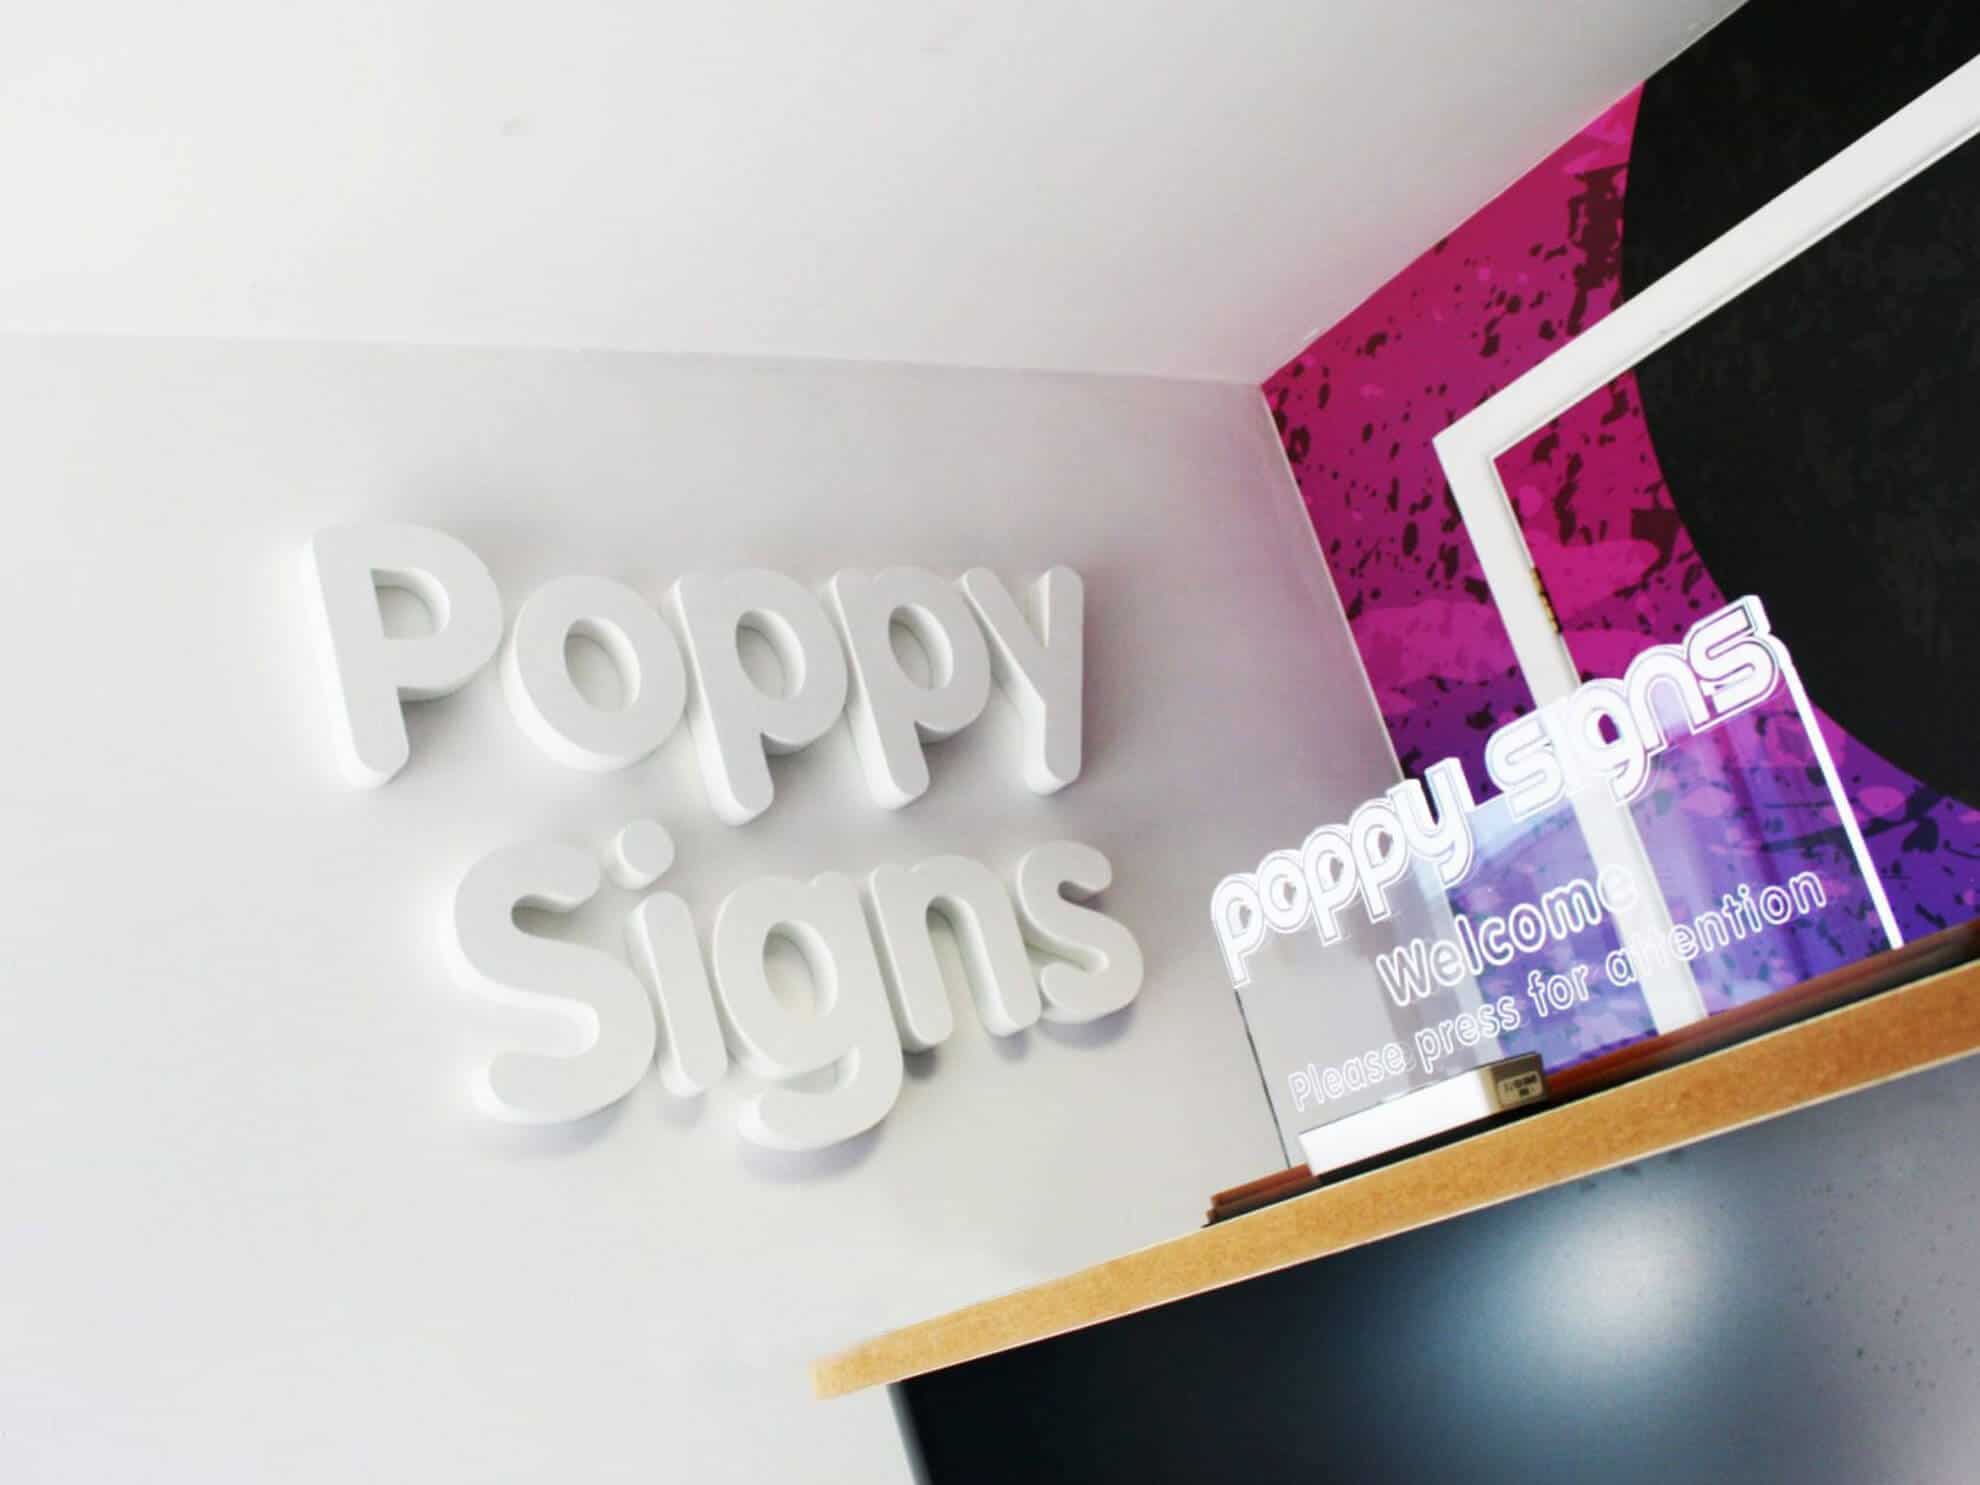 Poppy signs receptions signage